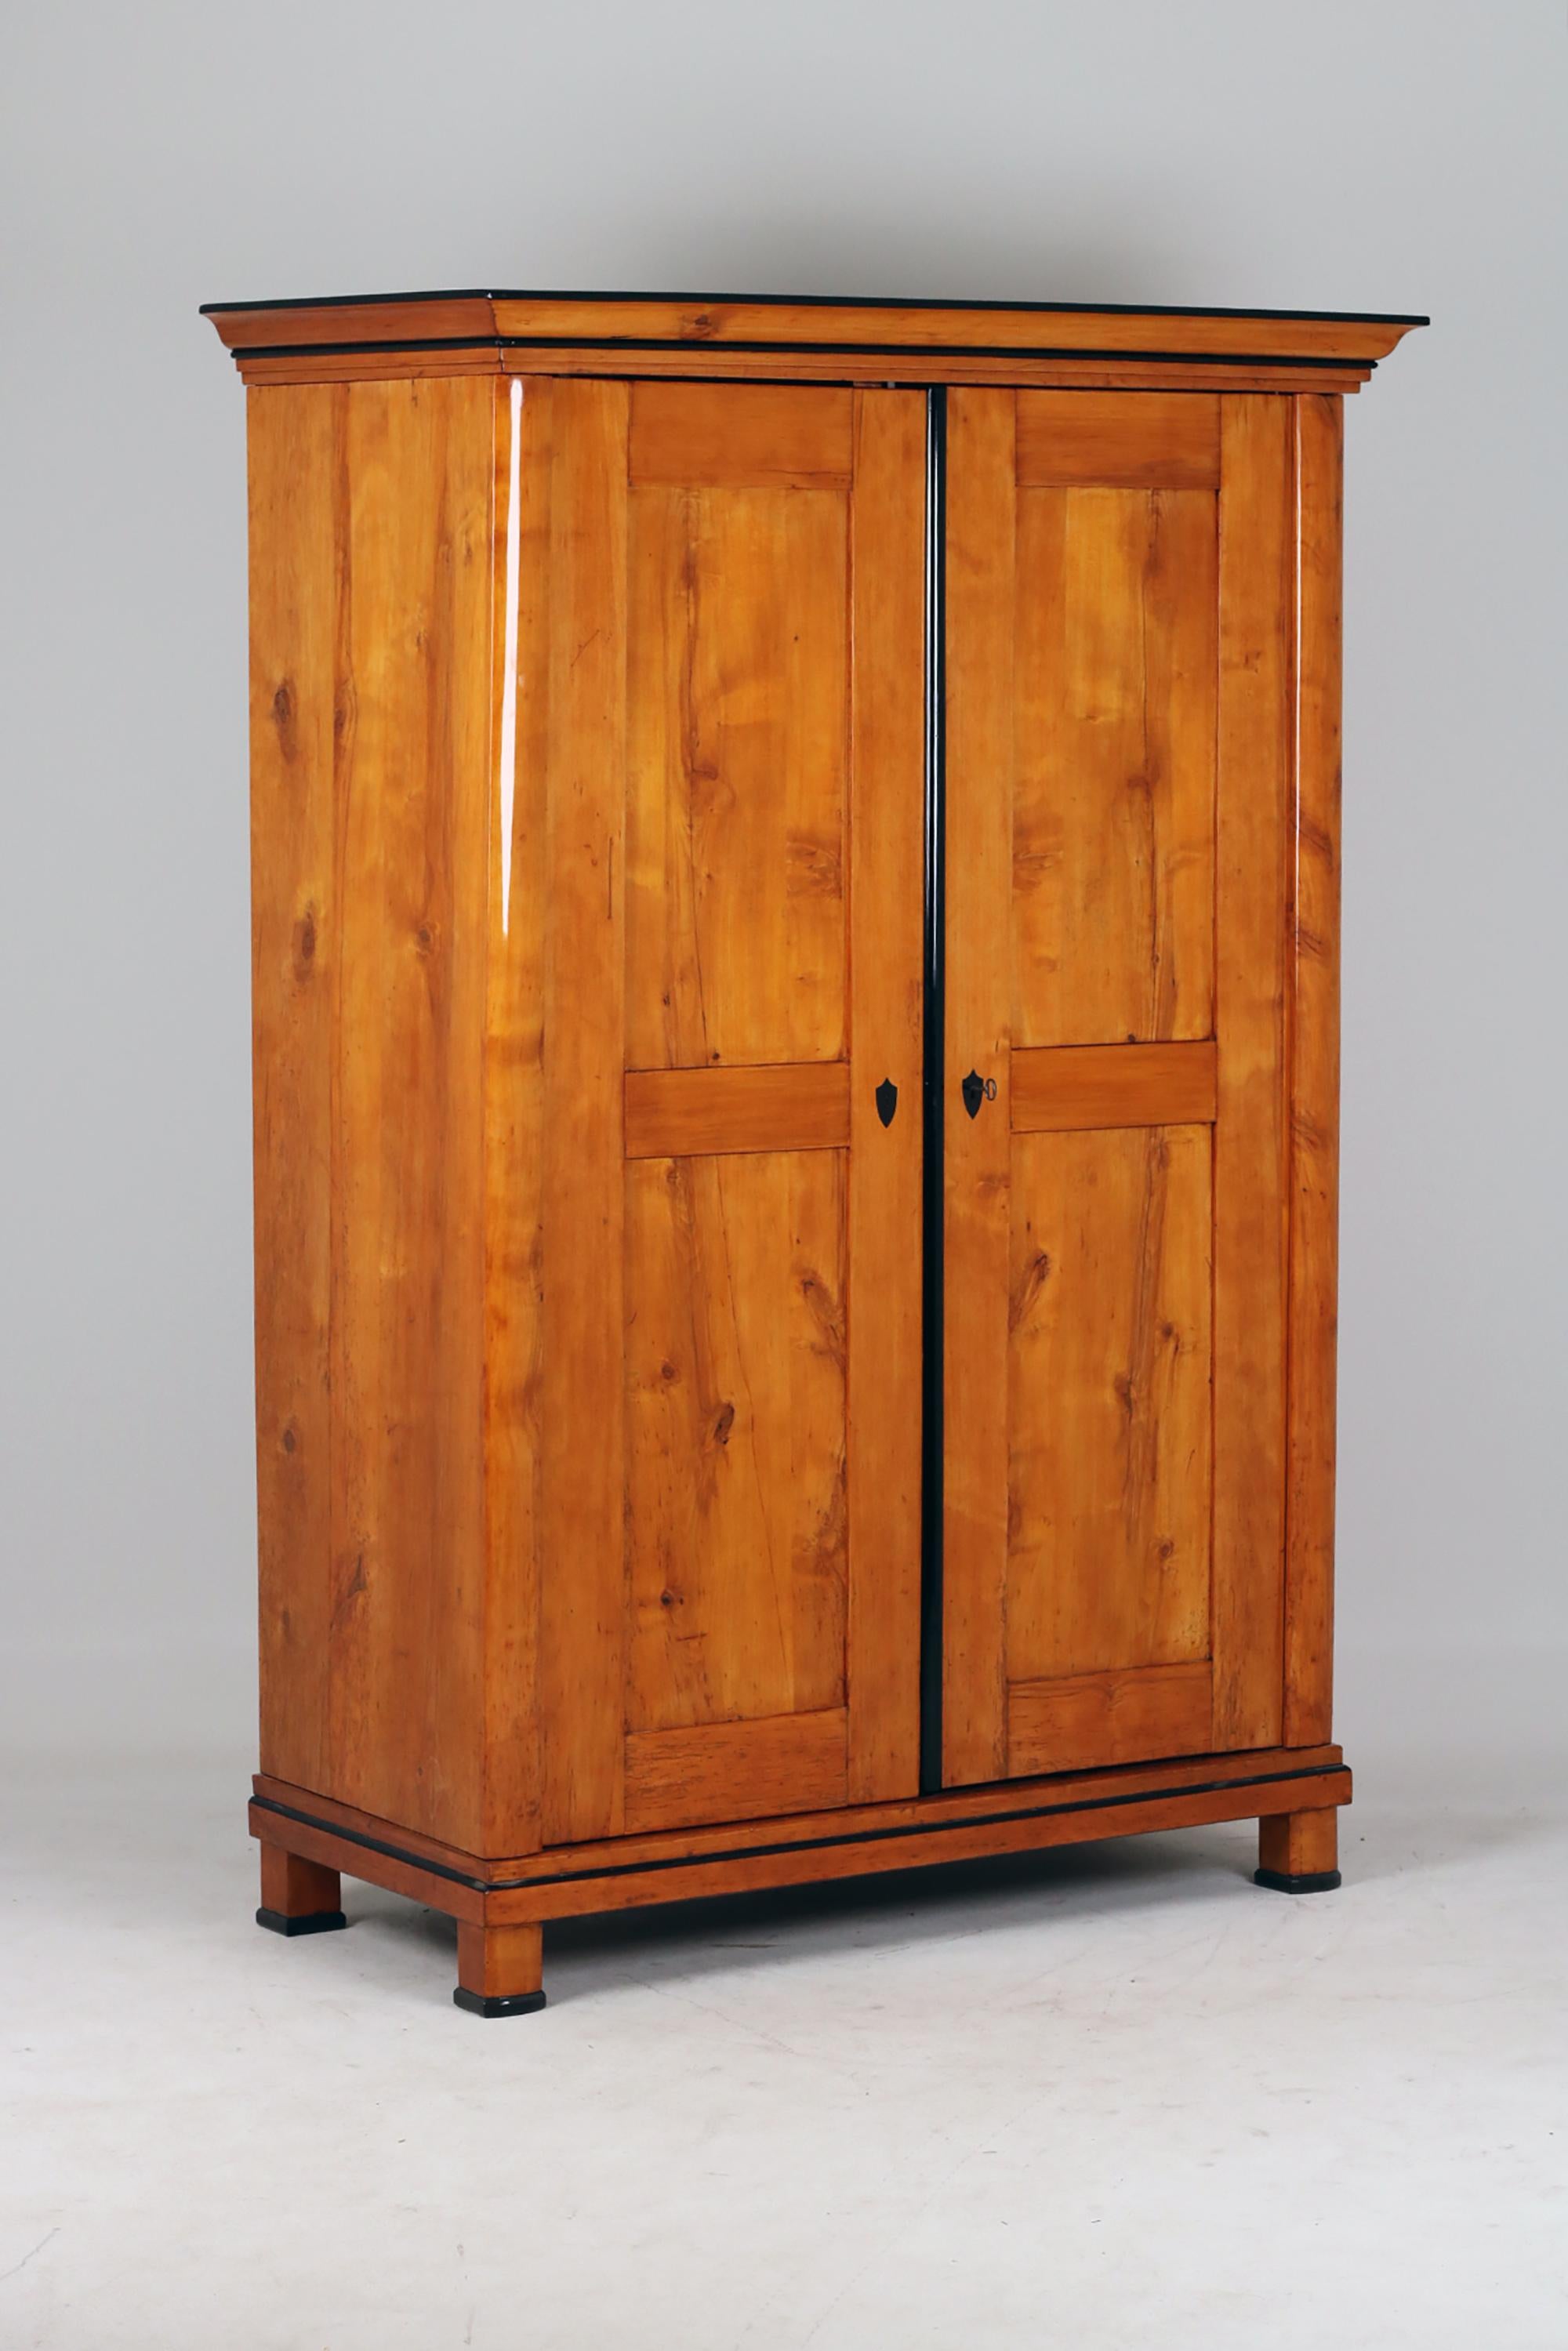 19th Century Biedermeier Cabinet,
Austria, 1830
Birchwood,

Biedermeier two door cabinet standing on four block feet with harmonious birch wood grain.
An example of piece of furniture from Austria. Pilasters strips are typical by furniture of this